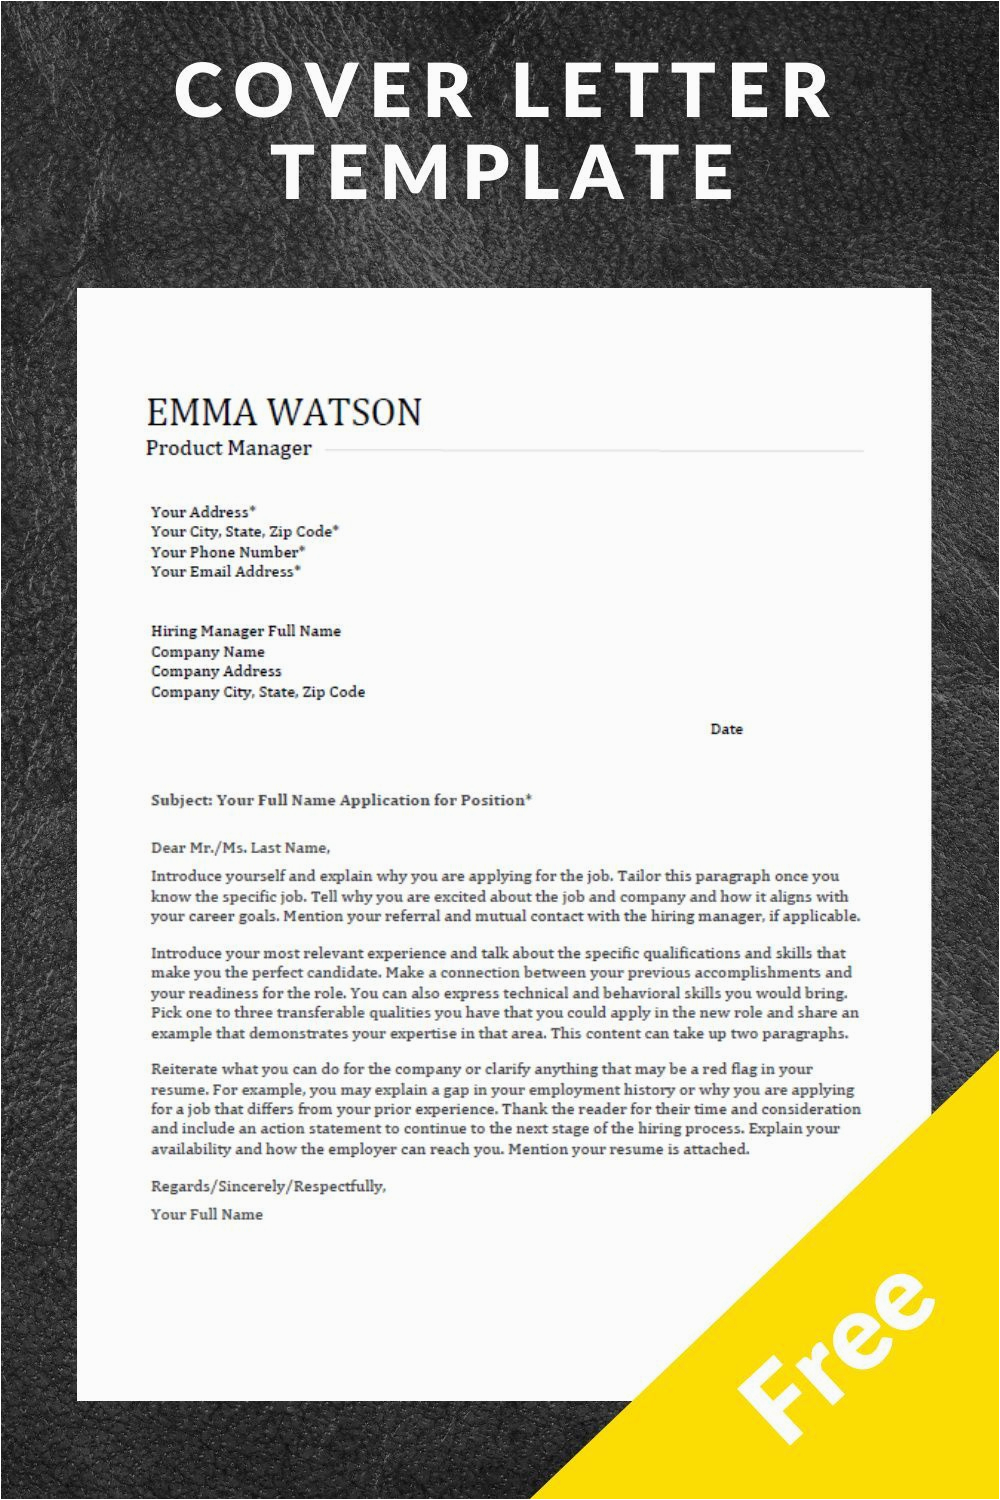 Free General Resume Cover Letter Template Cover Letter Template Download for Free In 2020